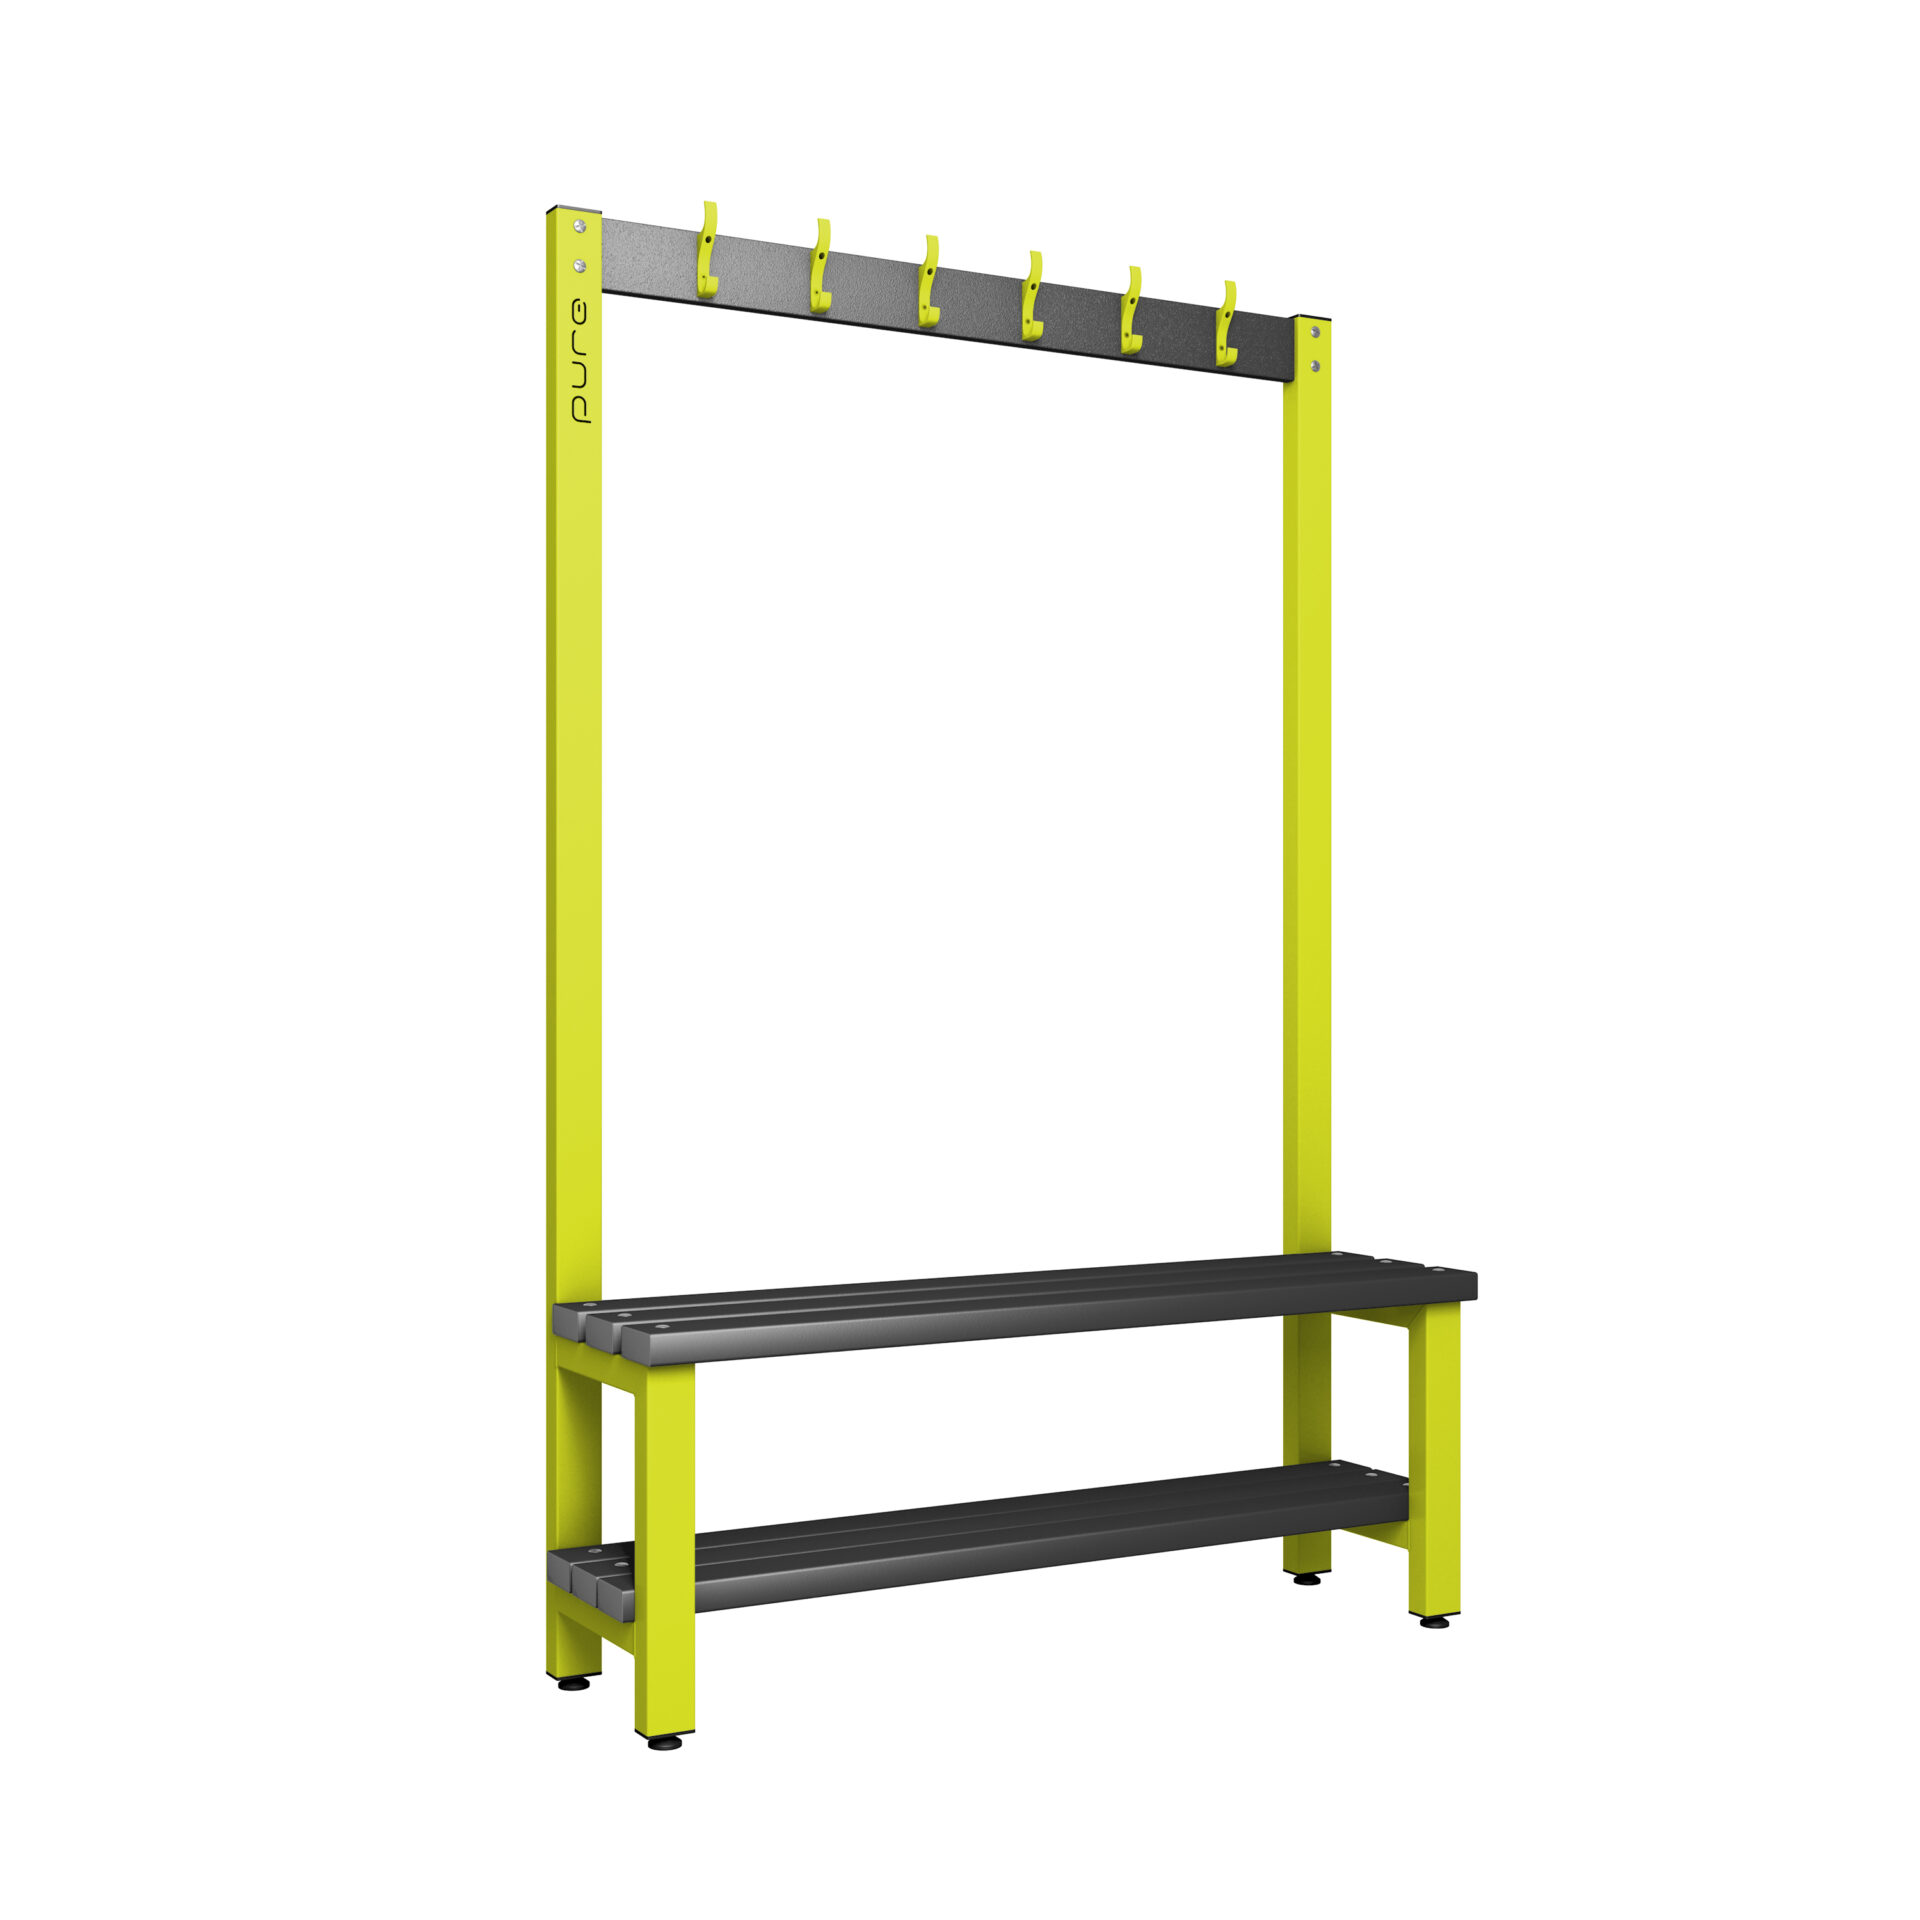 Pure Carbon Zero Single Sided 1200mm 6 Hook Bench With Shoe Shelf